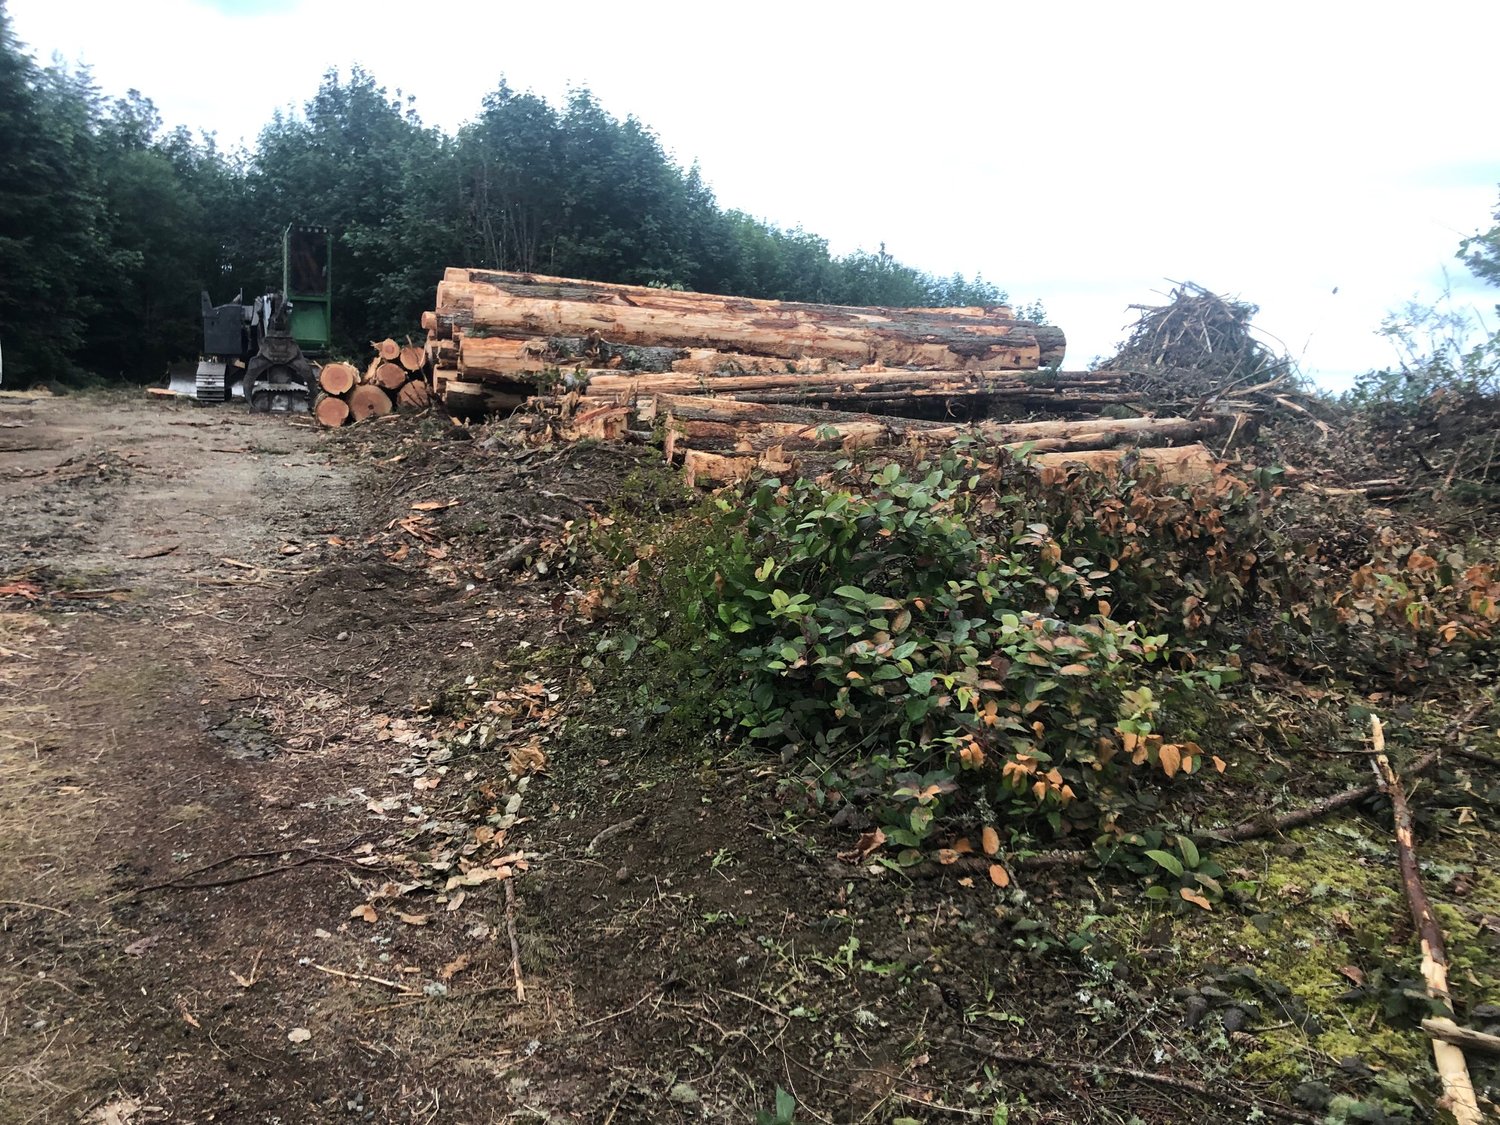 Logs piled up after they were harvested at the Green Cove Creek Watershed. This photo was taken July 5.